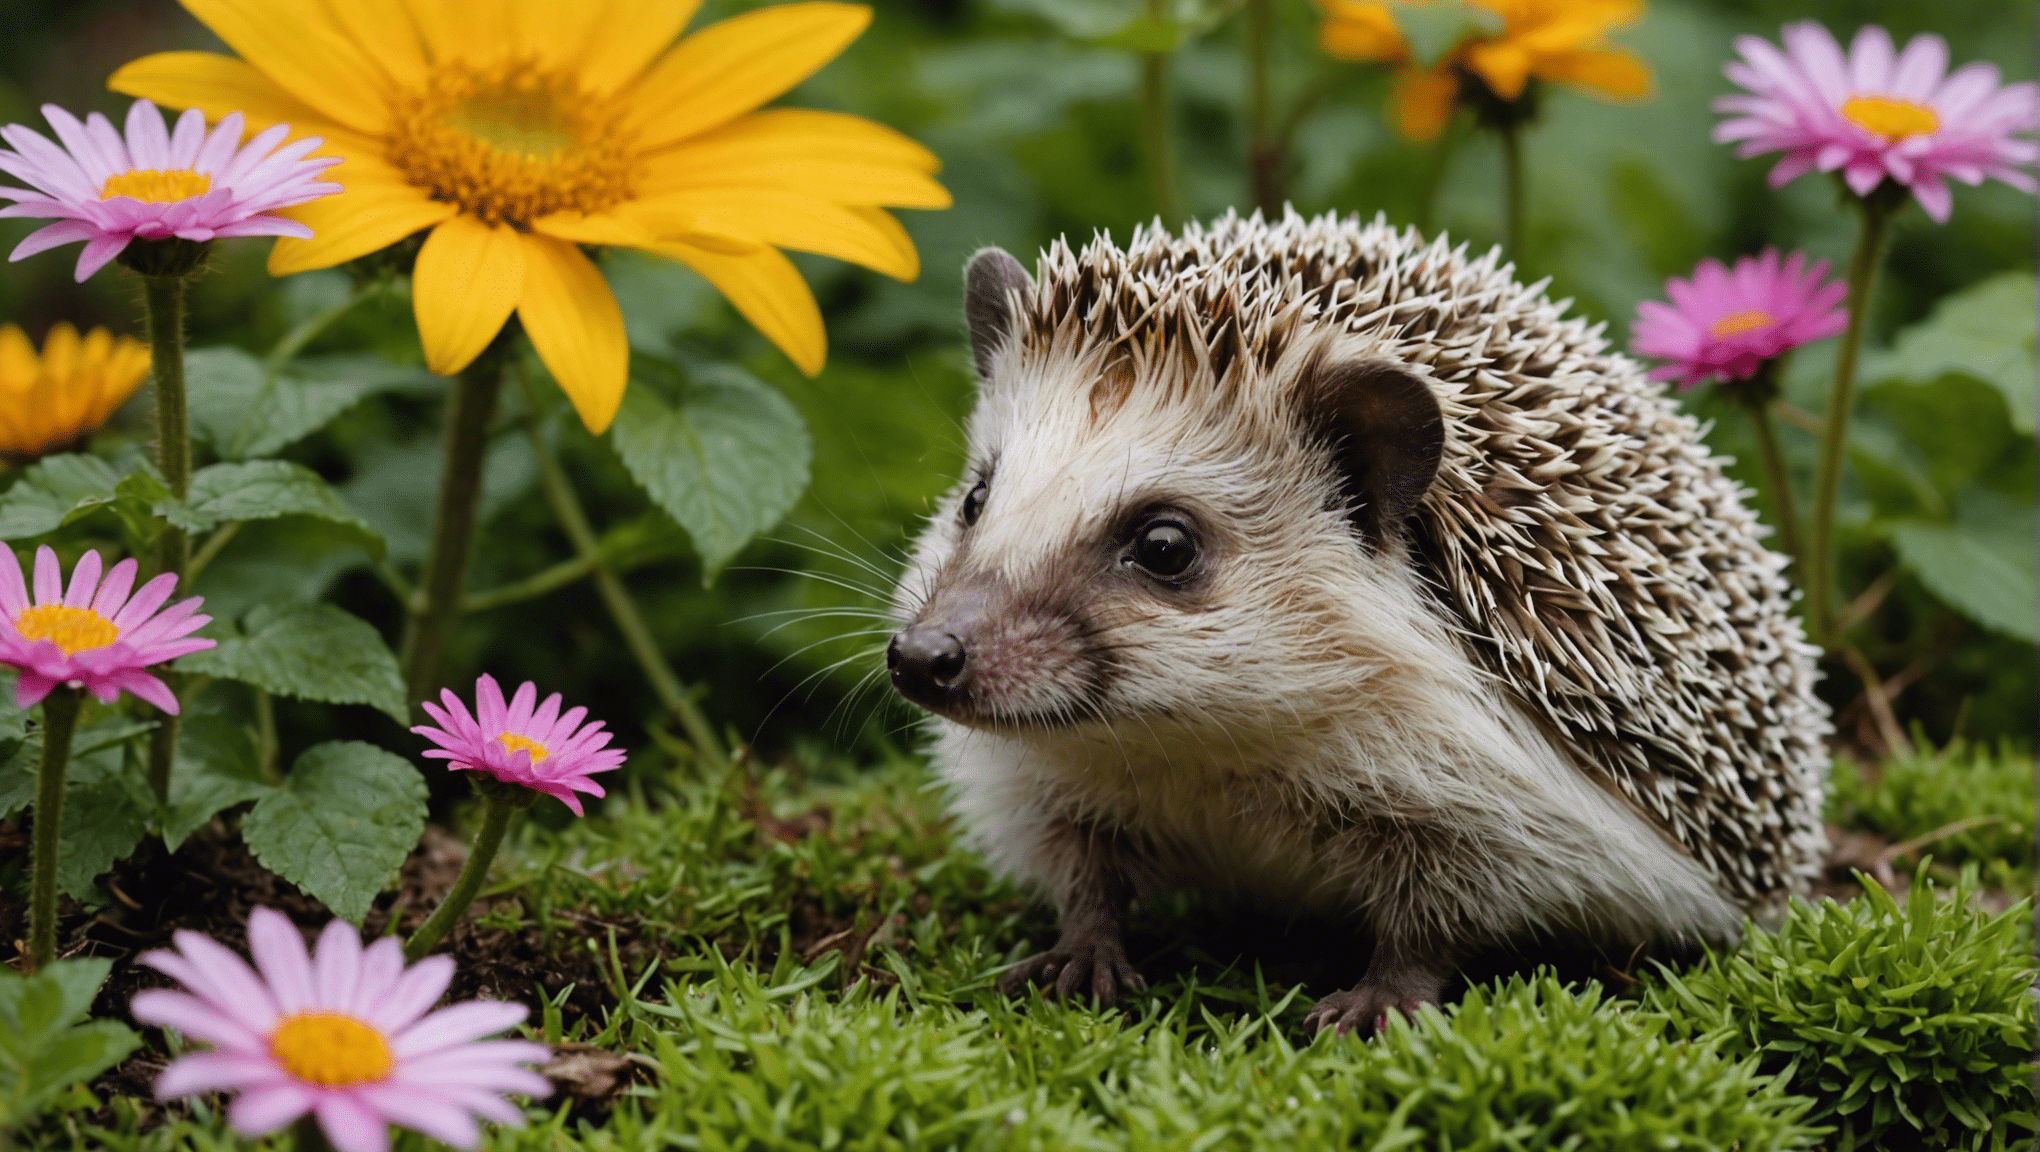 learn the essentials of hedgehog care with our 101 guide, covering everything from habitat setup to dietary requirements.